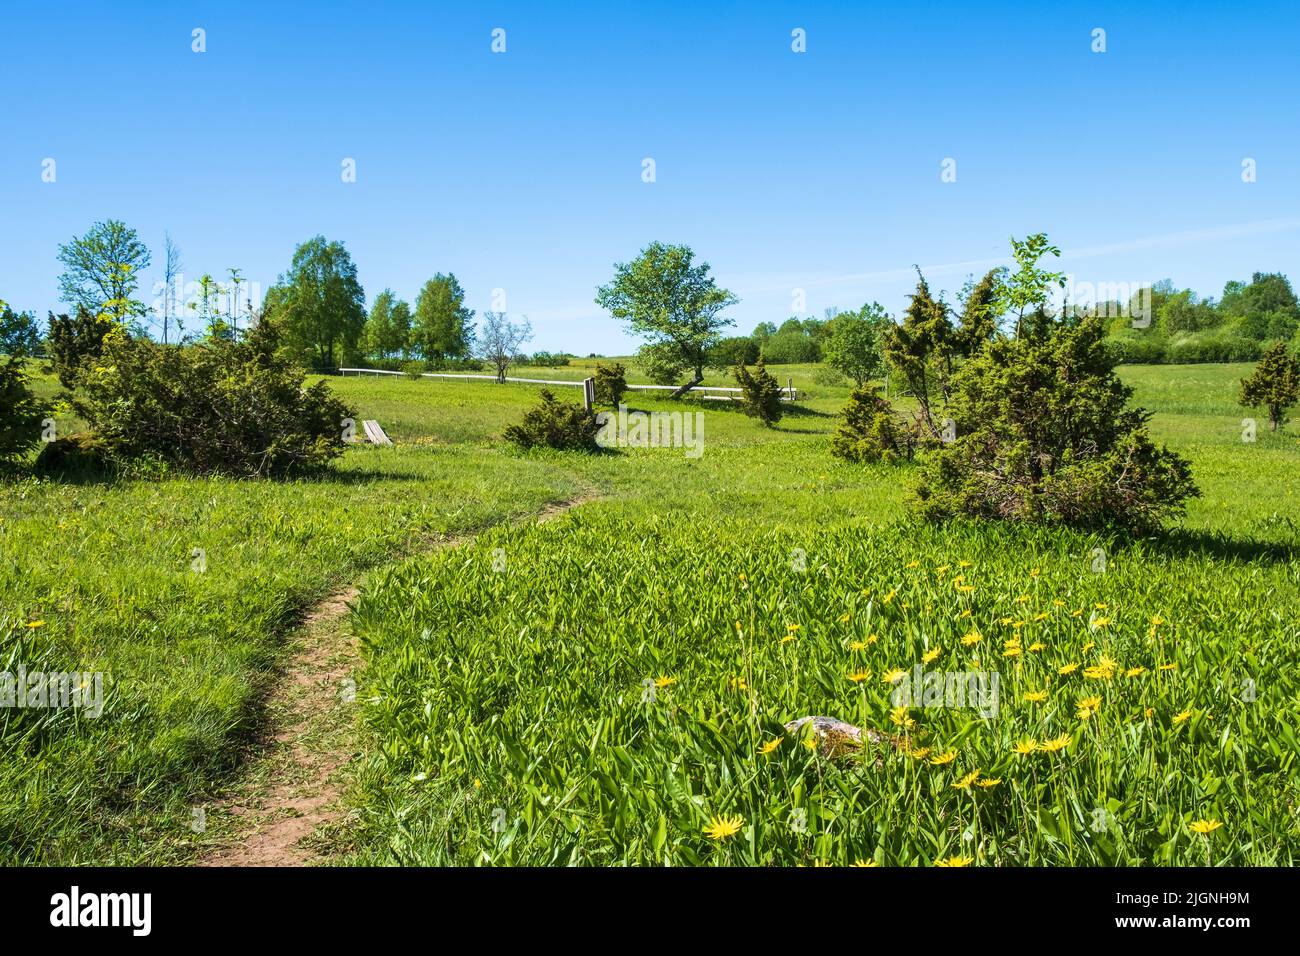 Hiking trail on a flowering meadow Stock Photo